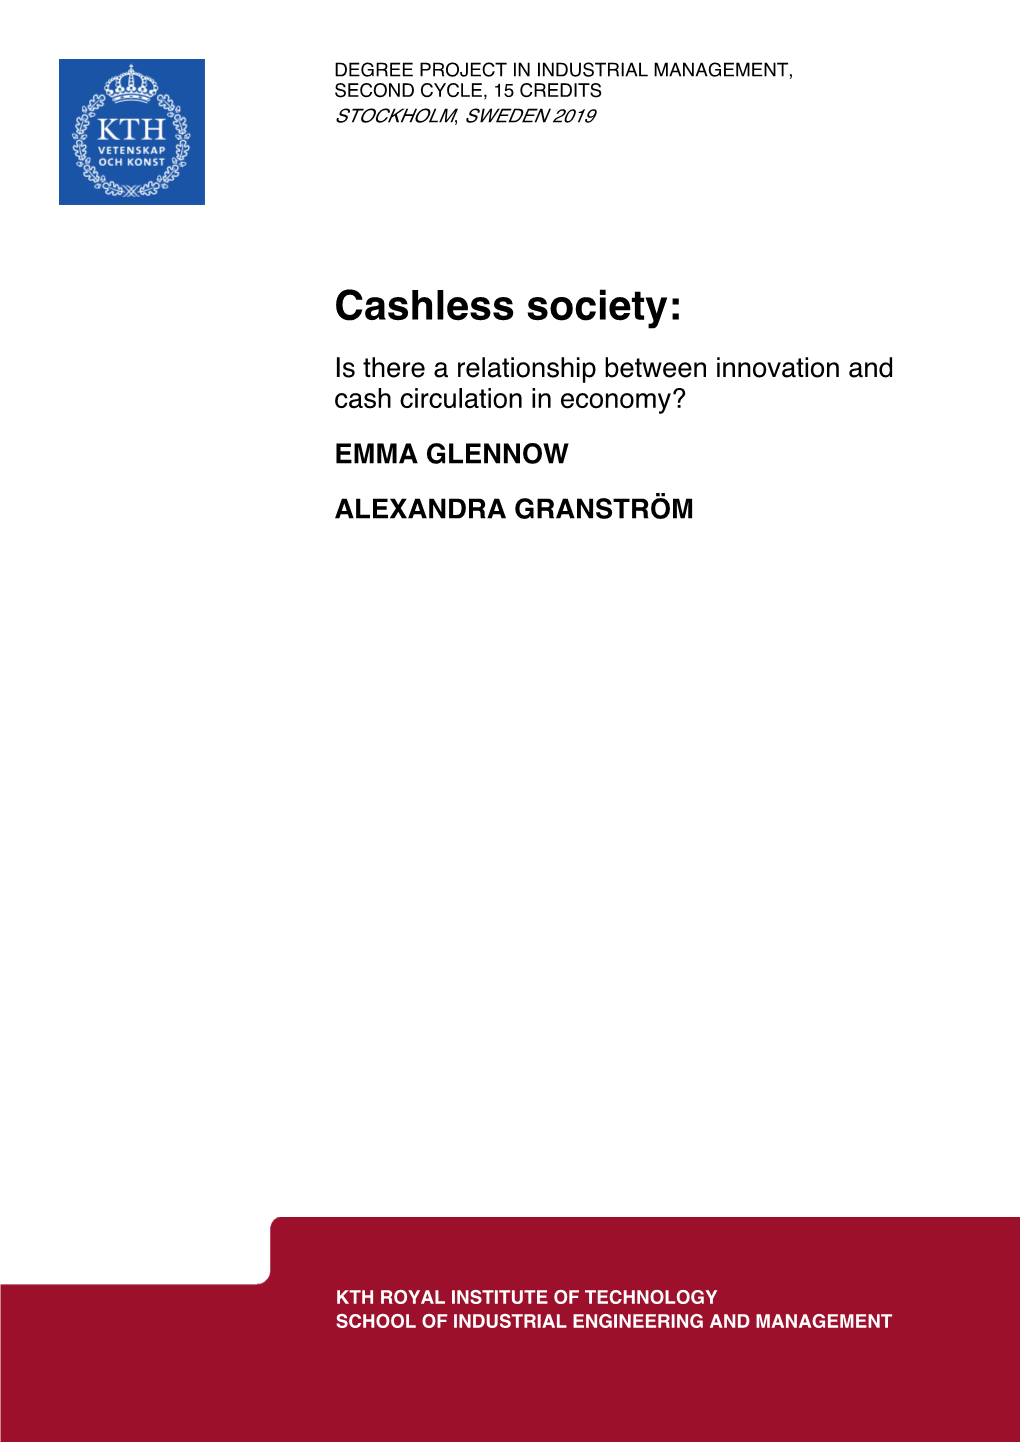 Cashless Society: Is There a Relationship Between Innovation and Cash Circulation in Economy?